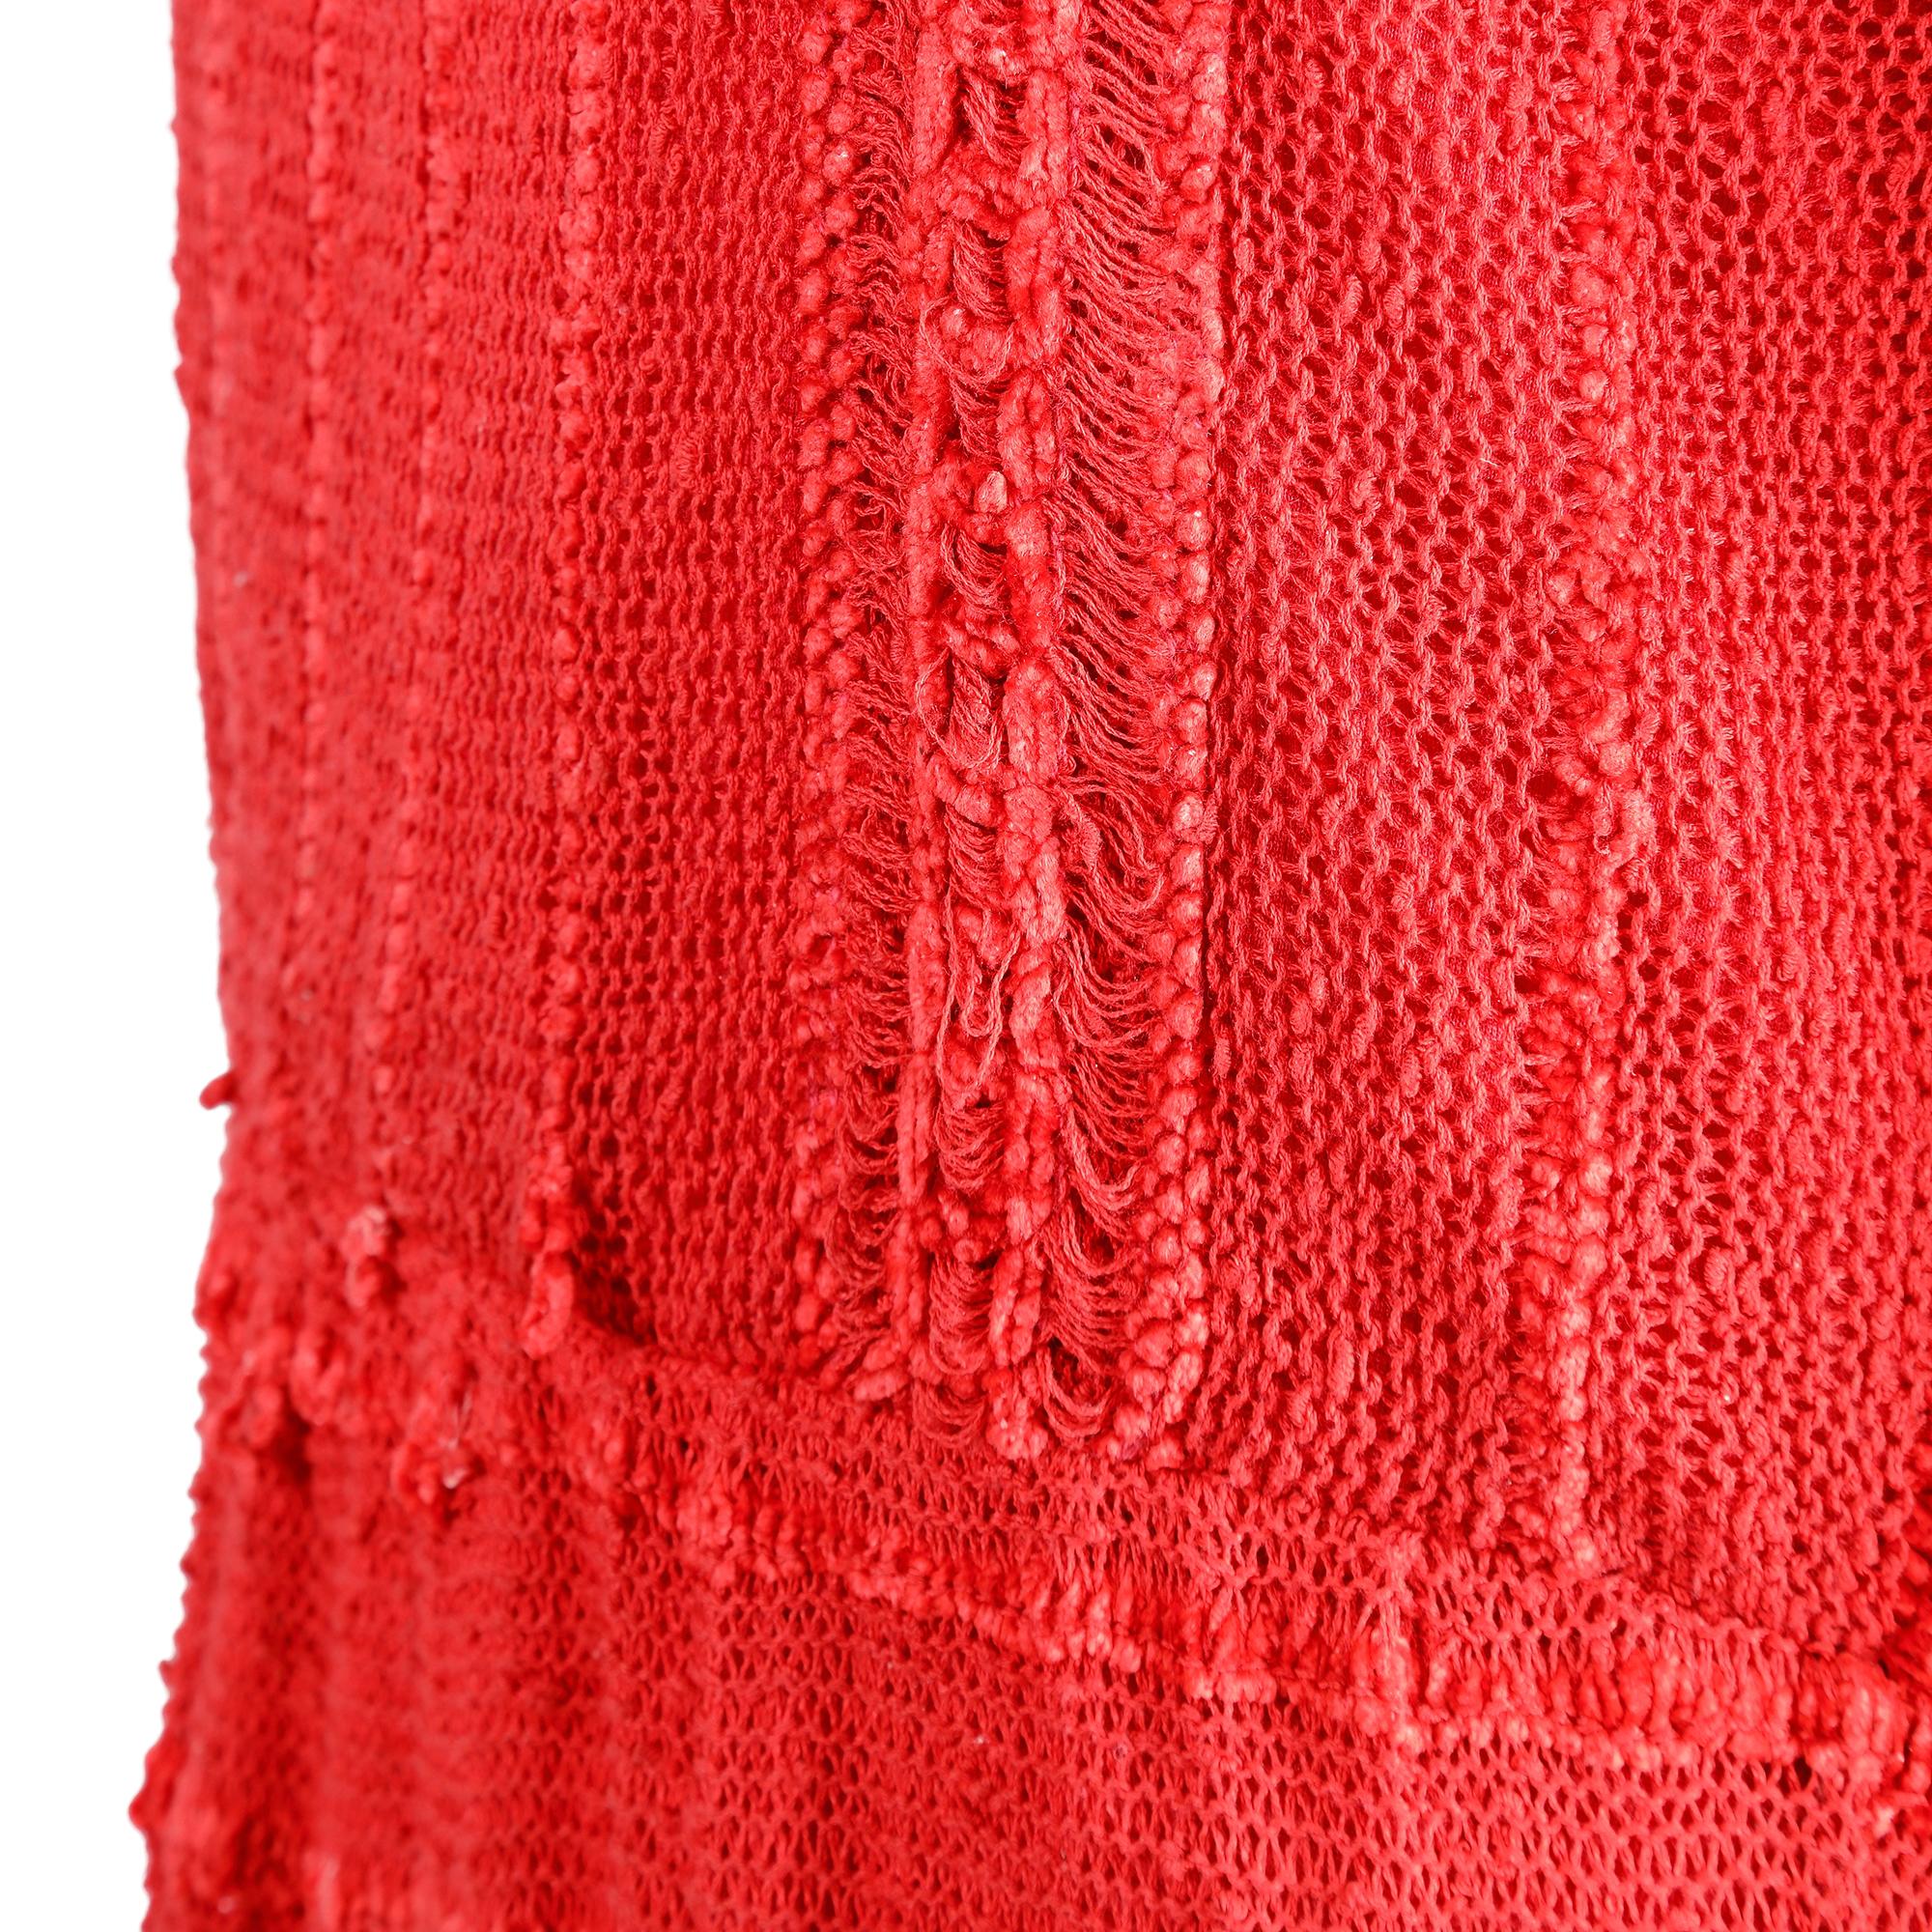 Women's 1970s French Crochet and Chenille Red Knit Dress For Sale